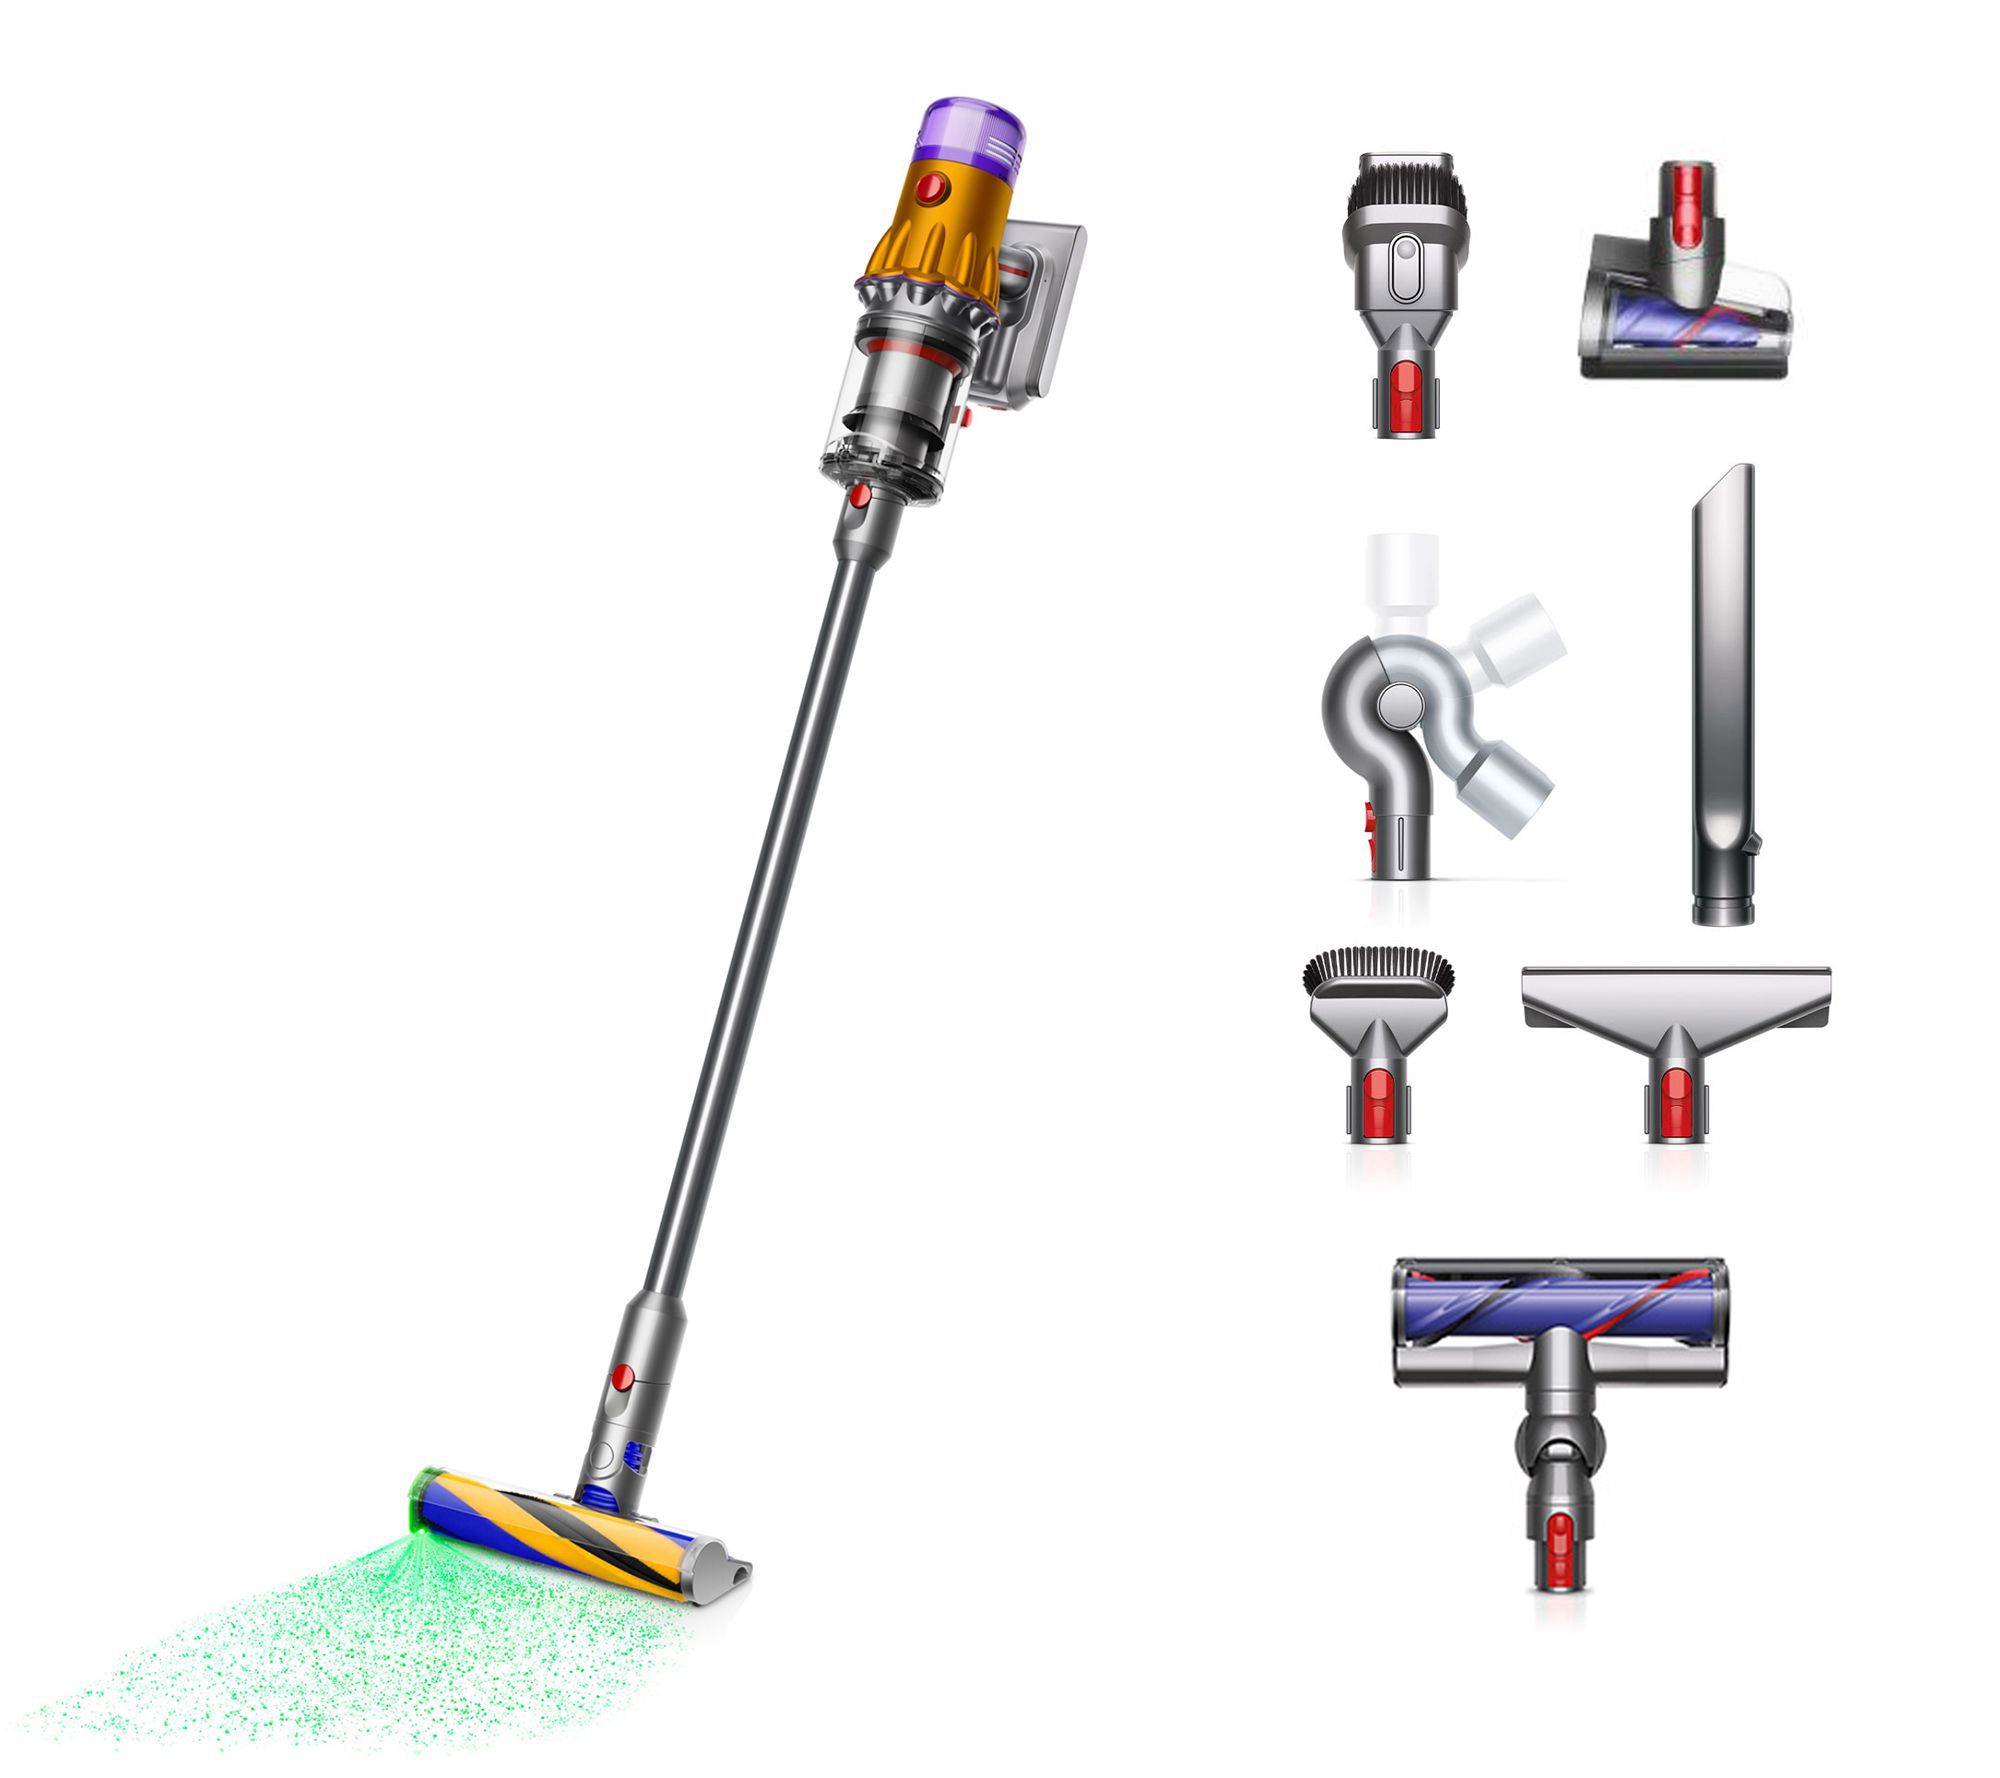 Understanding the LCD screen on your Dyson V12 Detect Slim